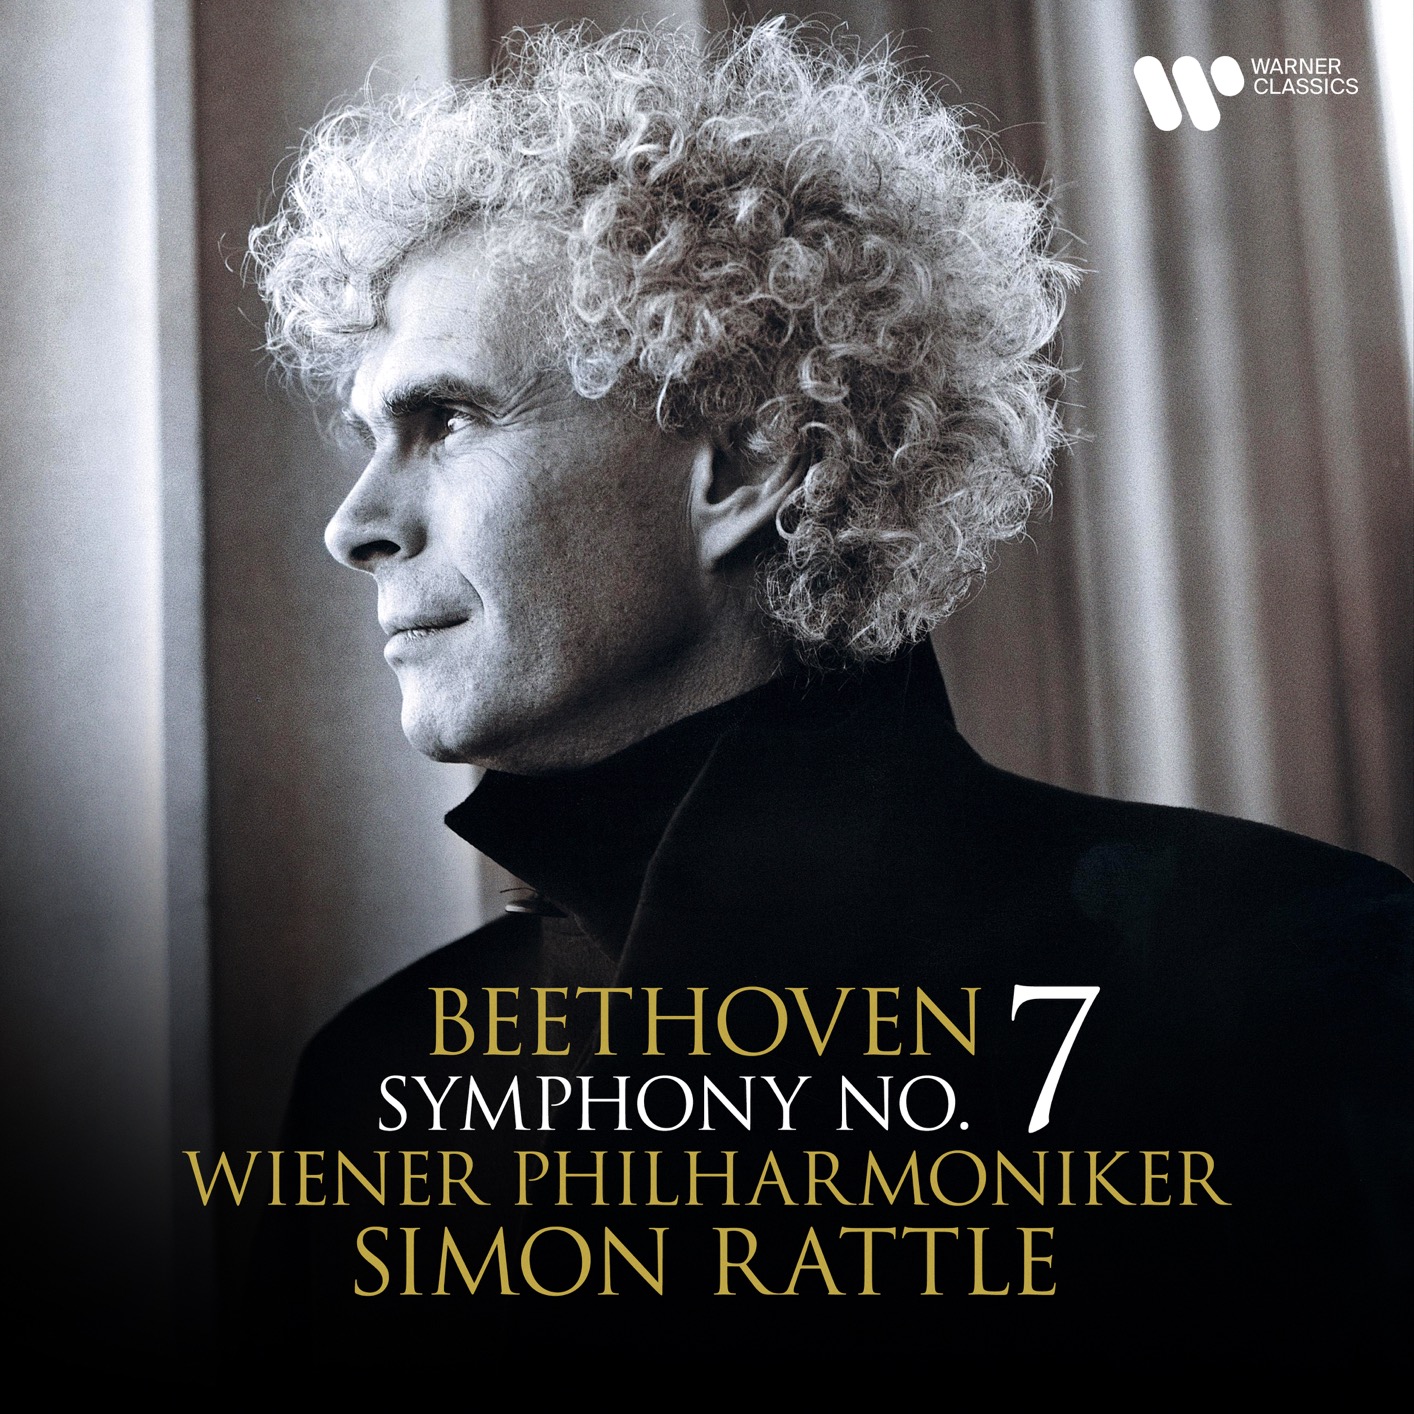 Wiener Philharmonic Orchestra & Simon Rattle - Beethoven: Symphony No. 7, Op. 92 (Remastered) (2021) [FLAC 24bit/44,1kHz]